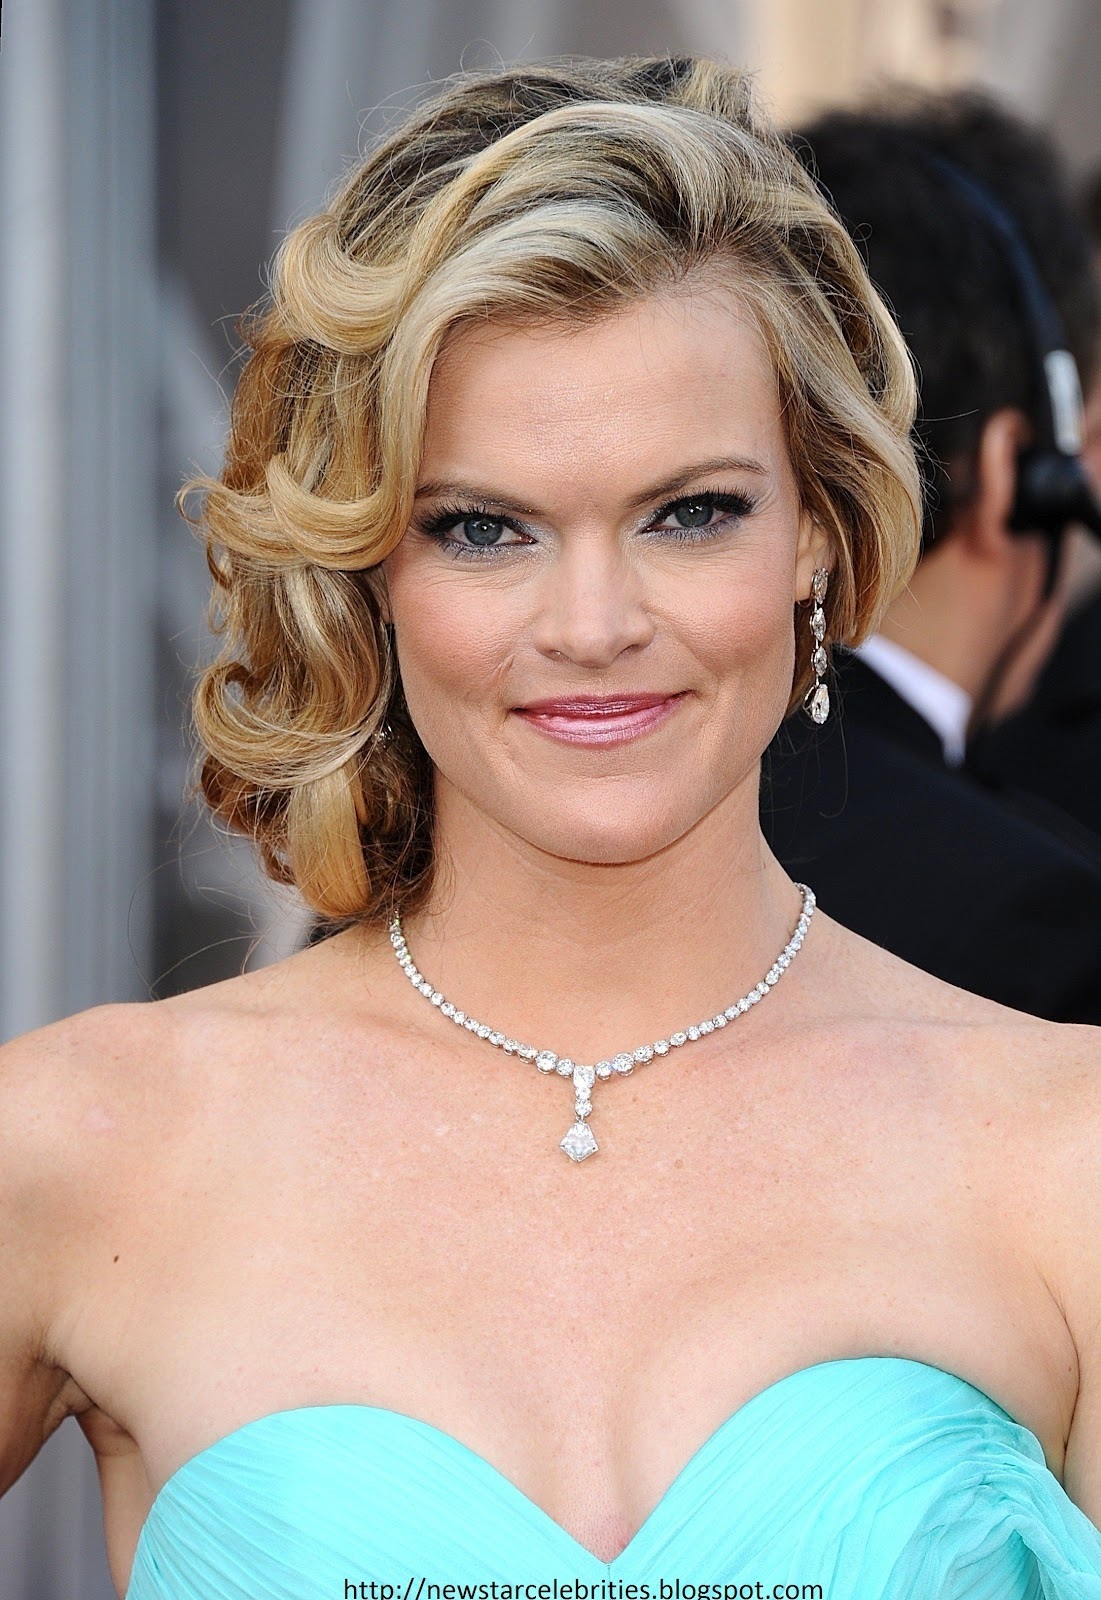 More Pictures Of Missi Pyle. missi pyle house. 